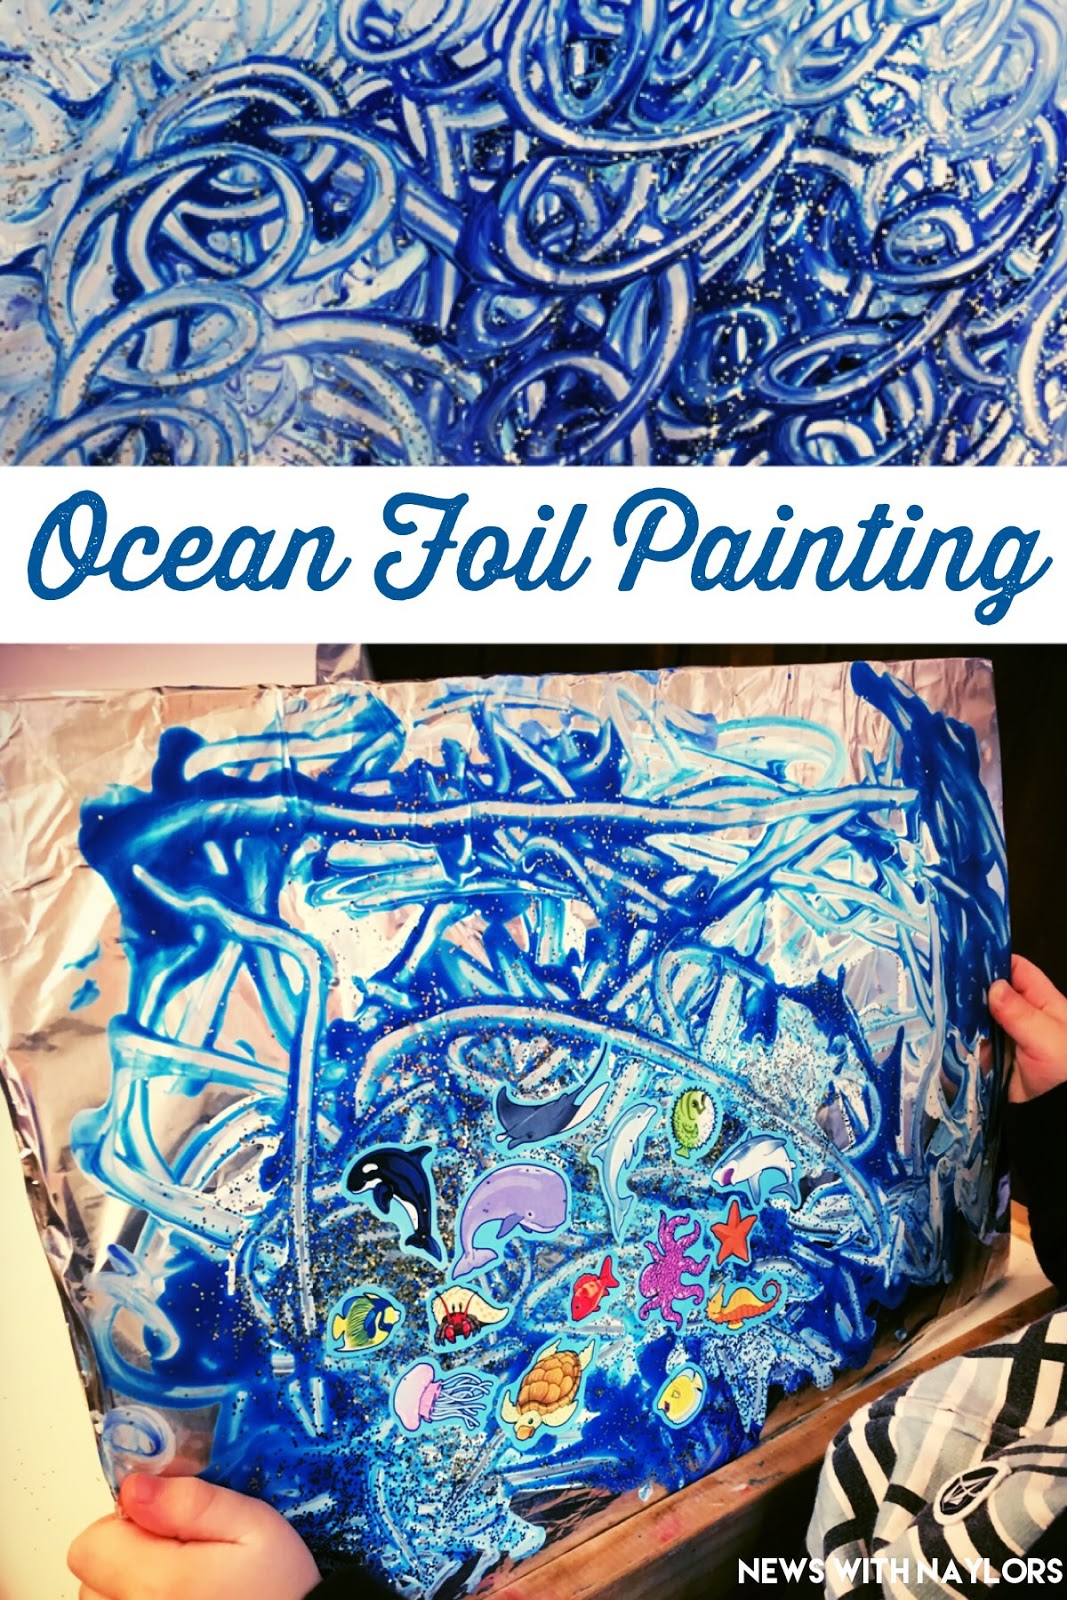 Foil art 🎨 All you need is foil, pens and water for the most fun cra, art